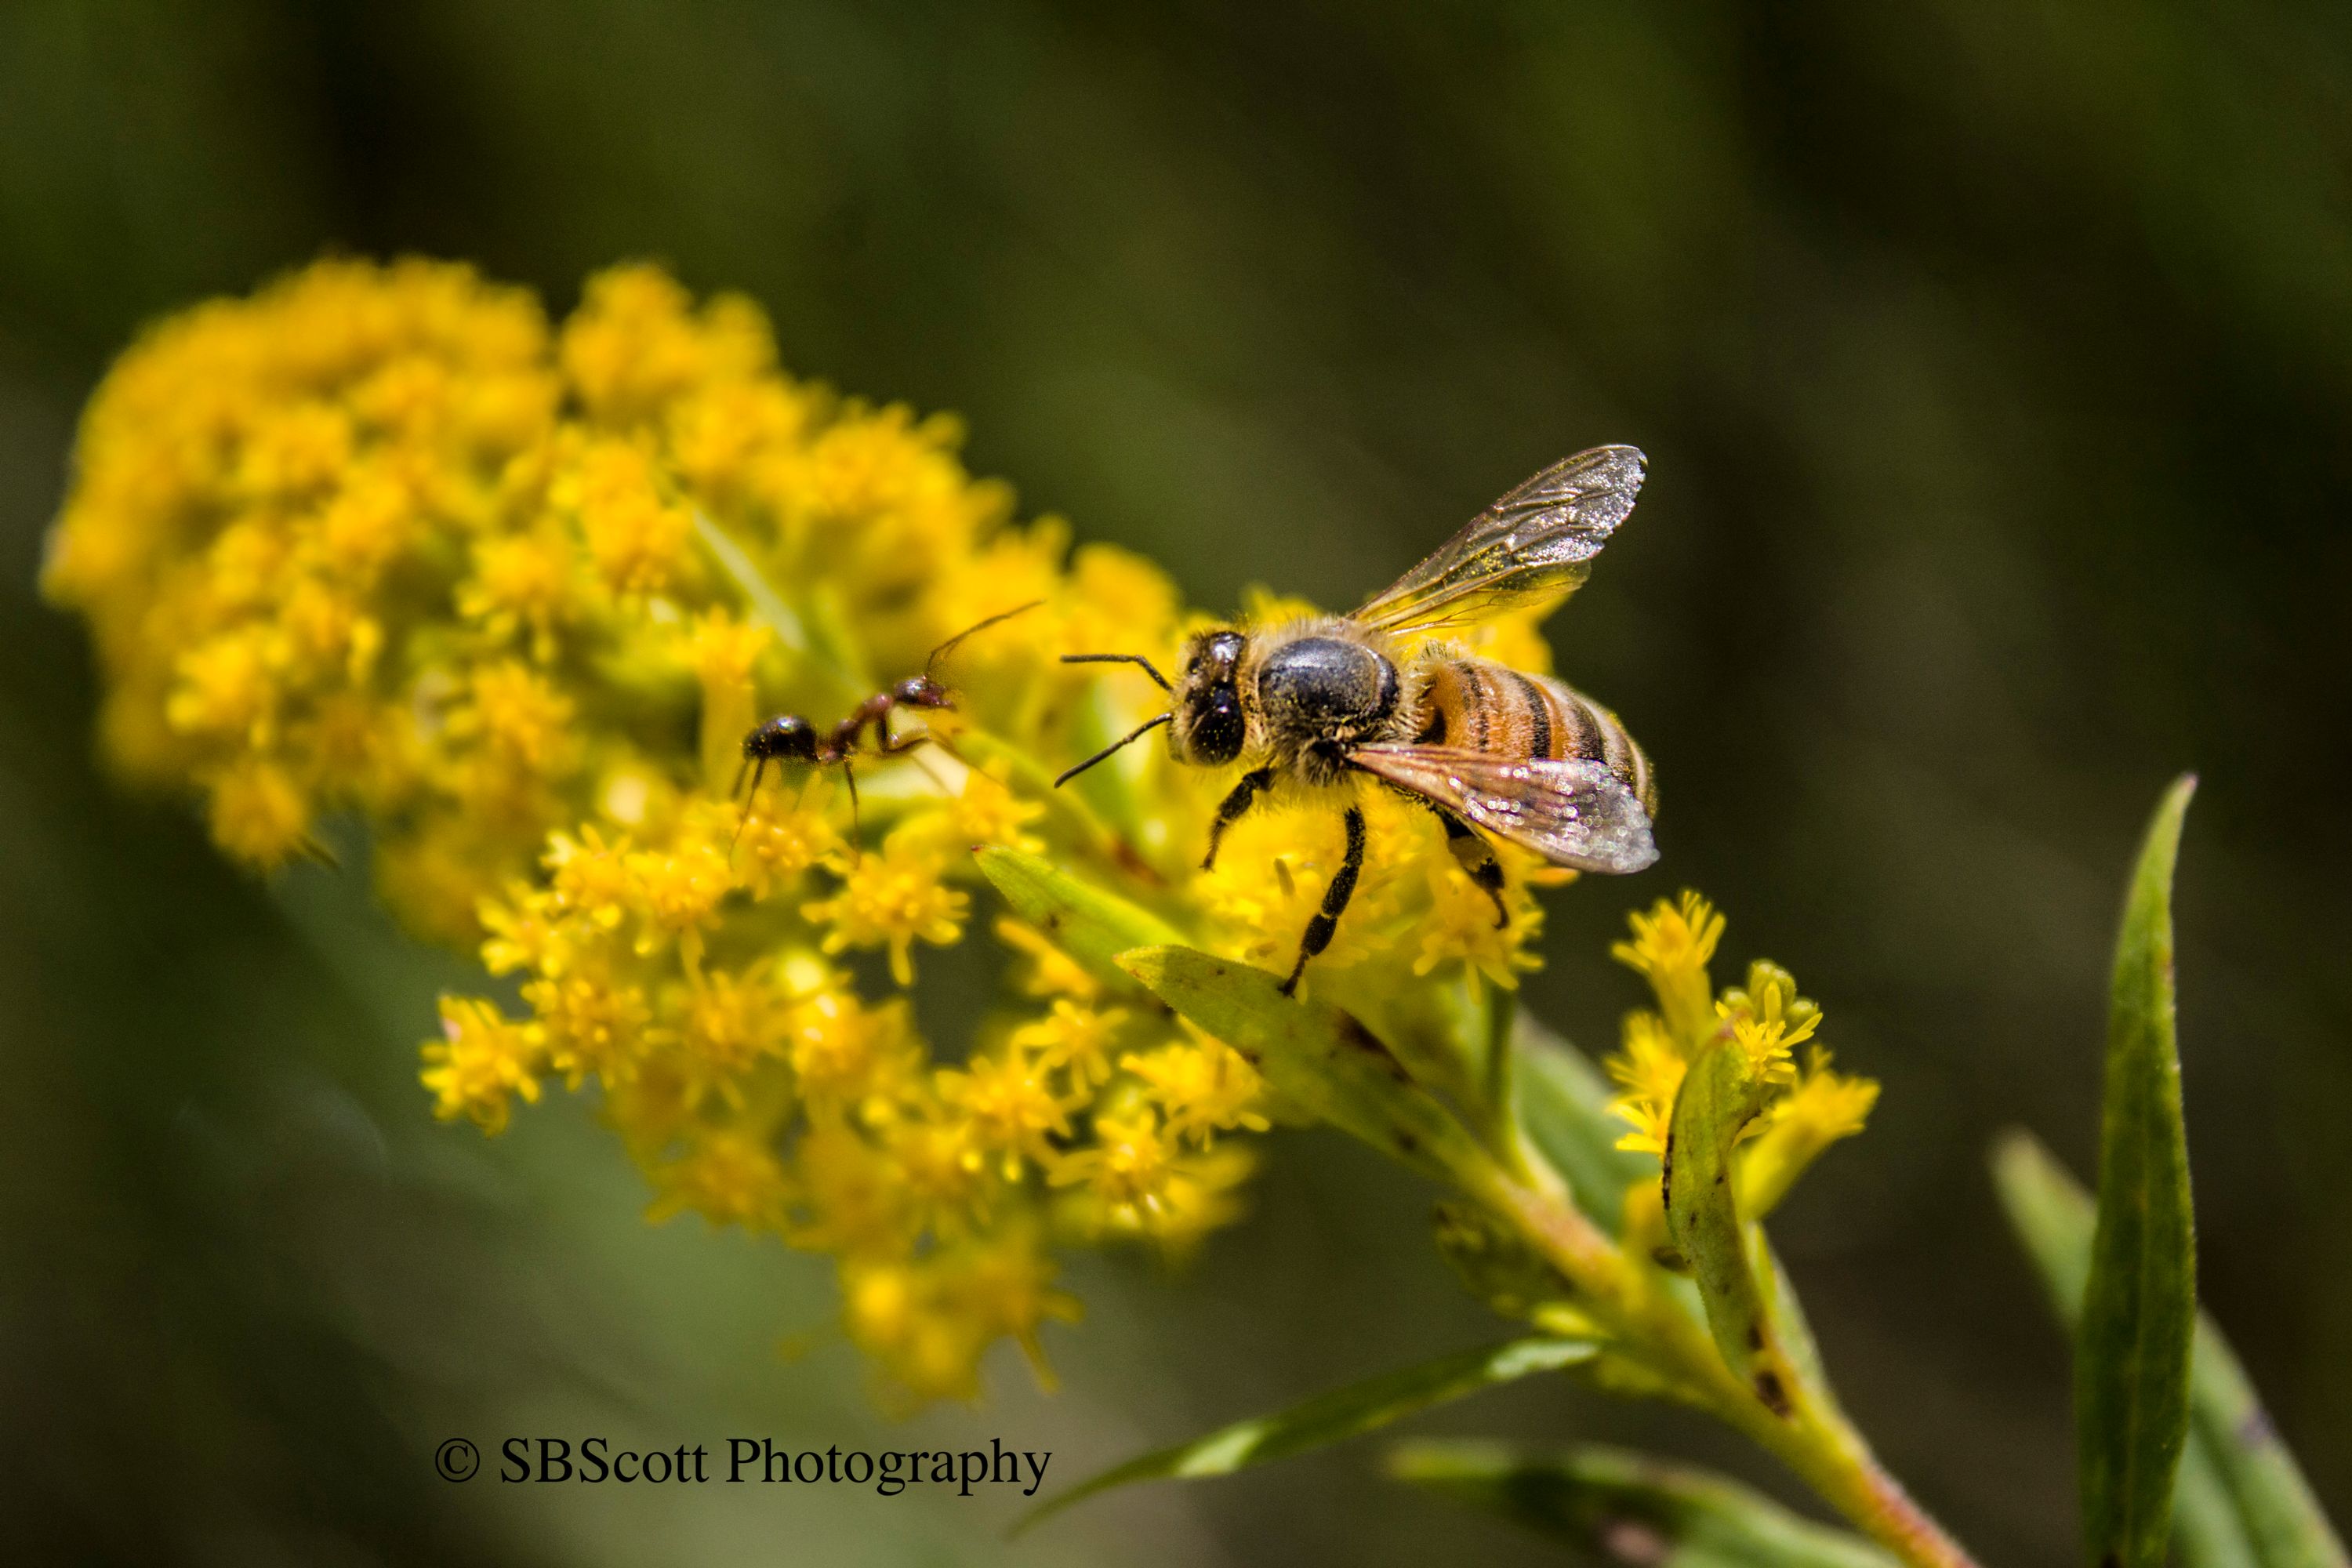 Honey bee and ant on goldenrod